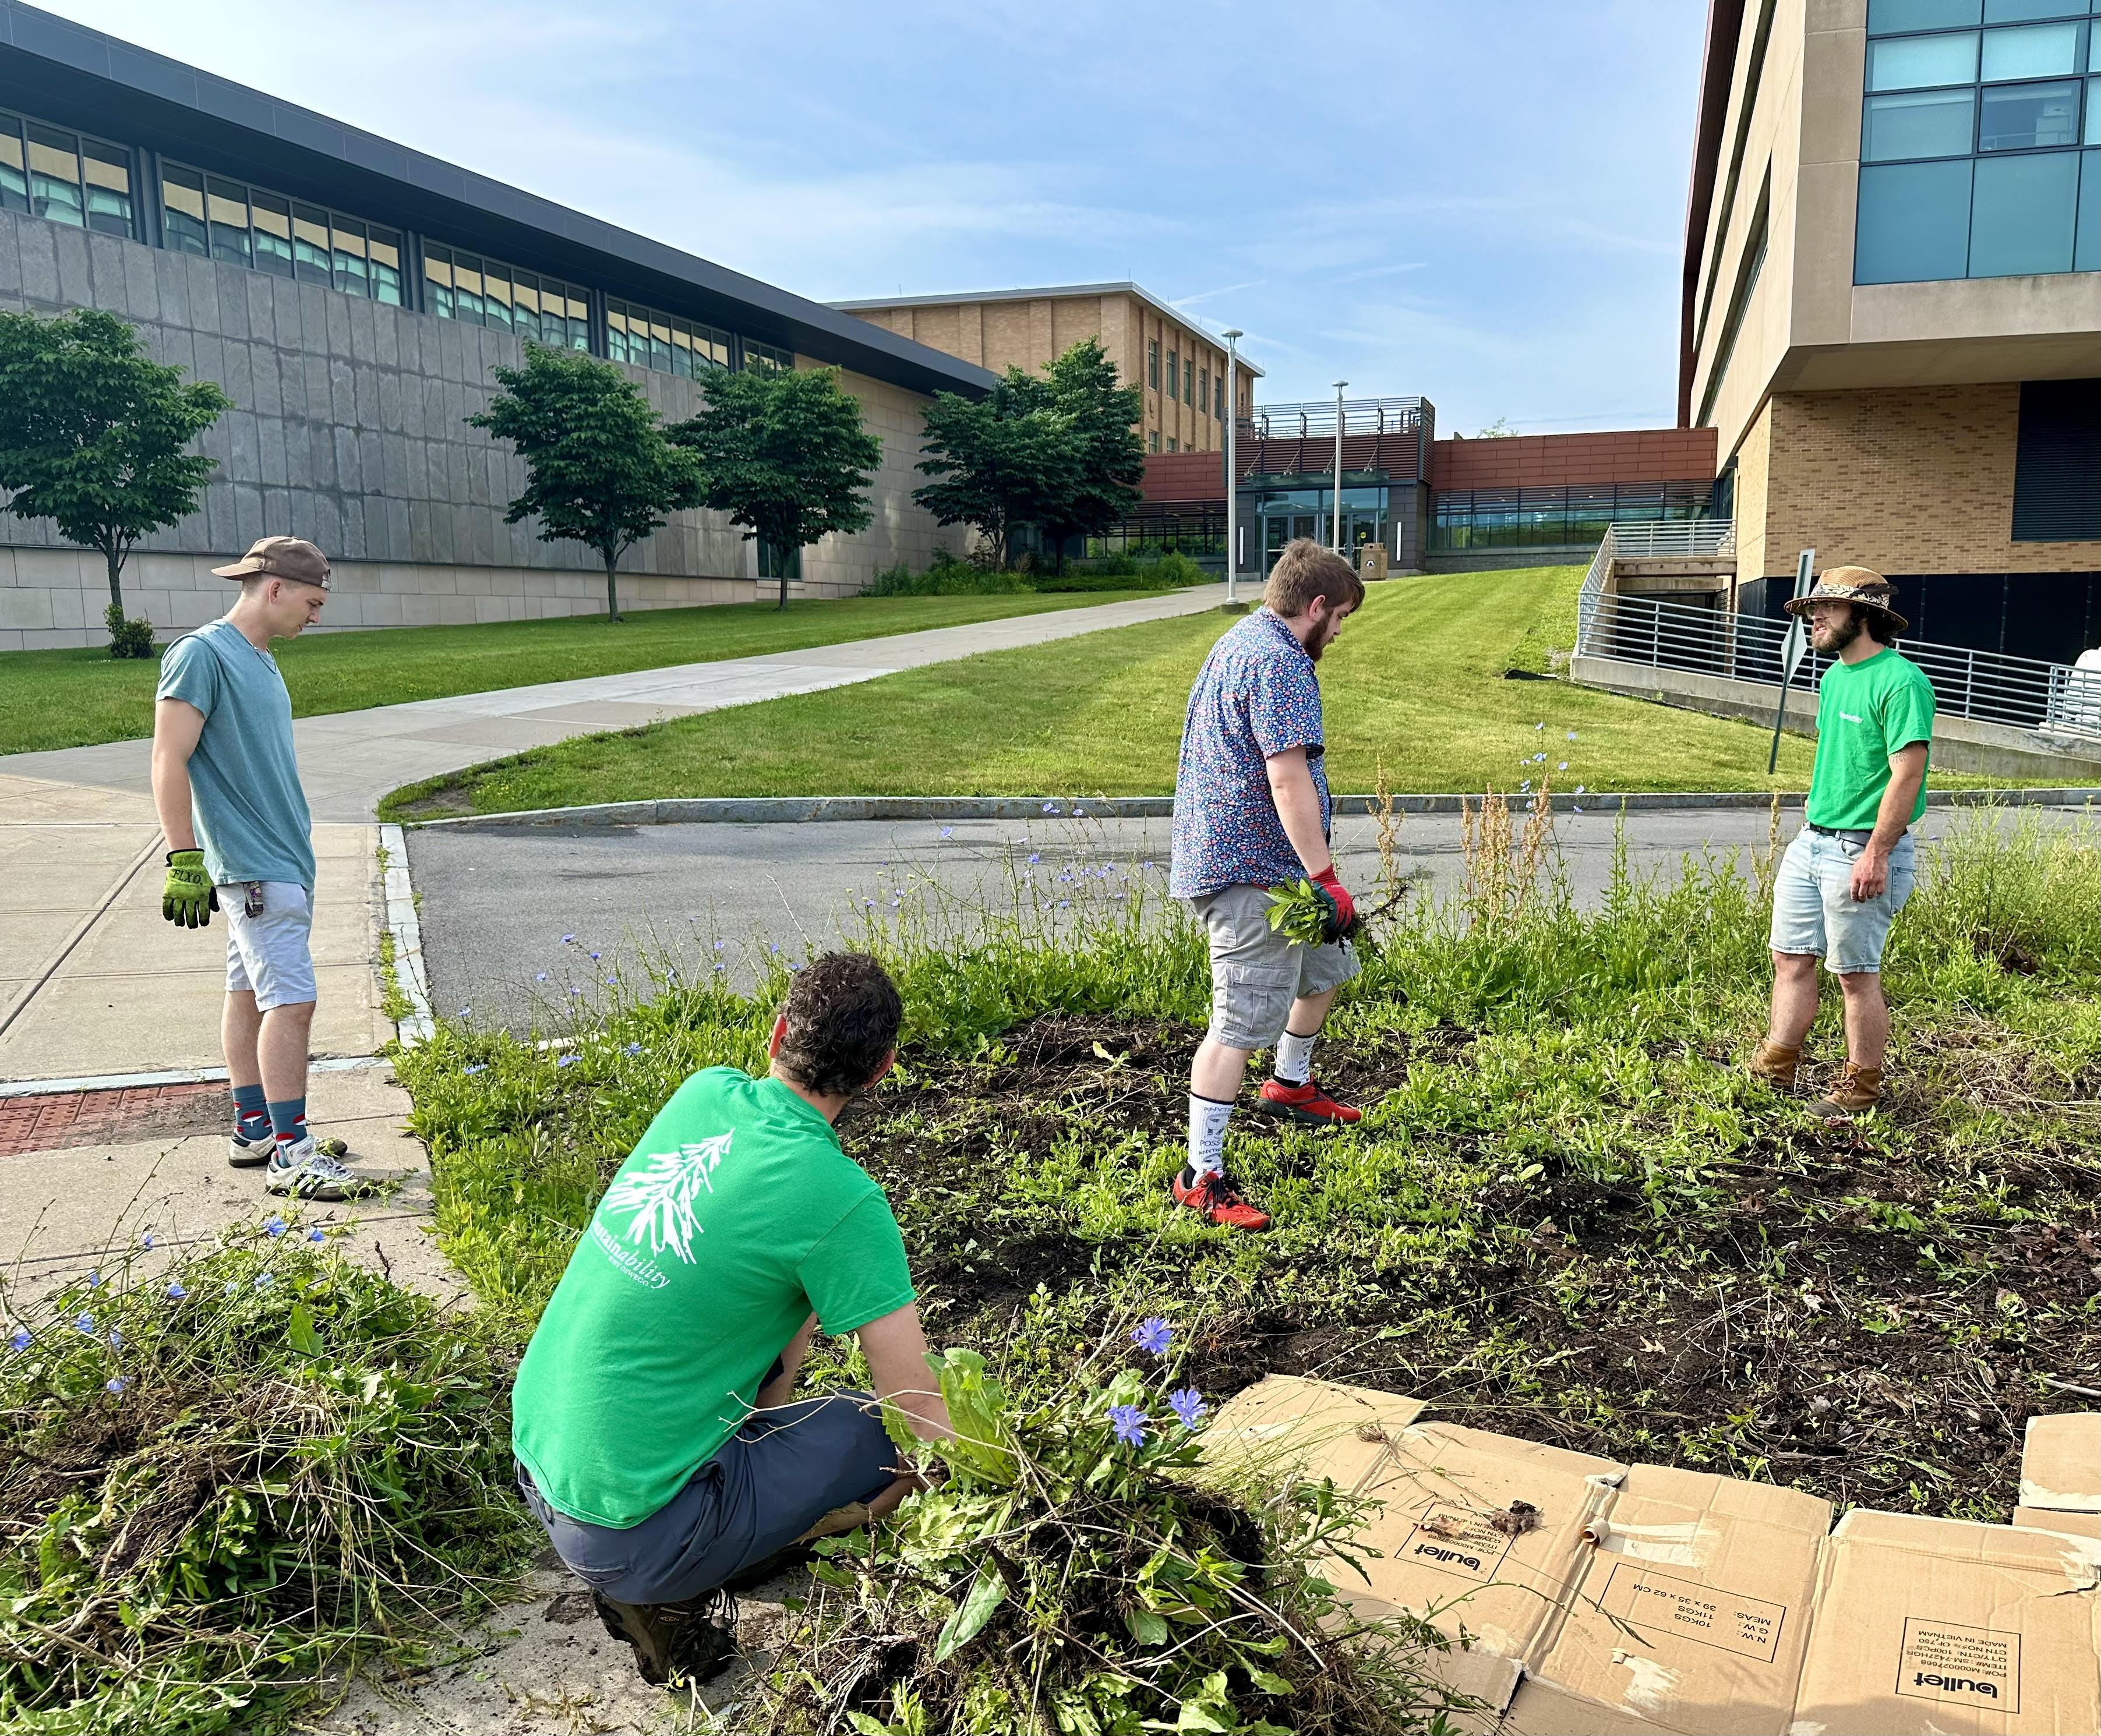 Students and staff members work in the Permaculture Learning Laboratory campus garden